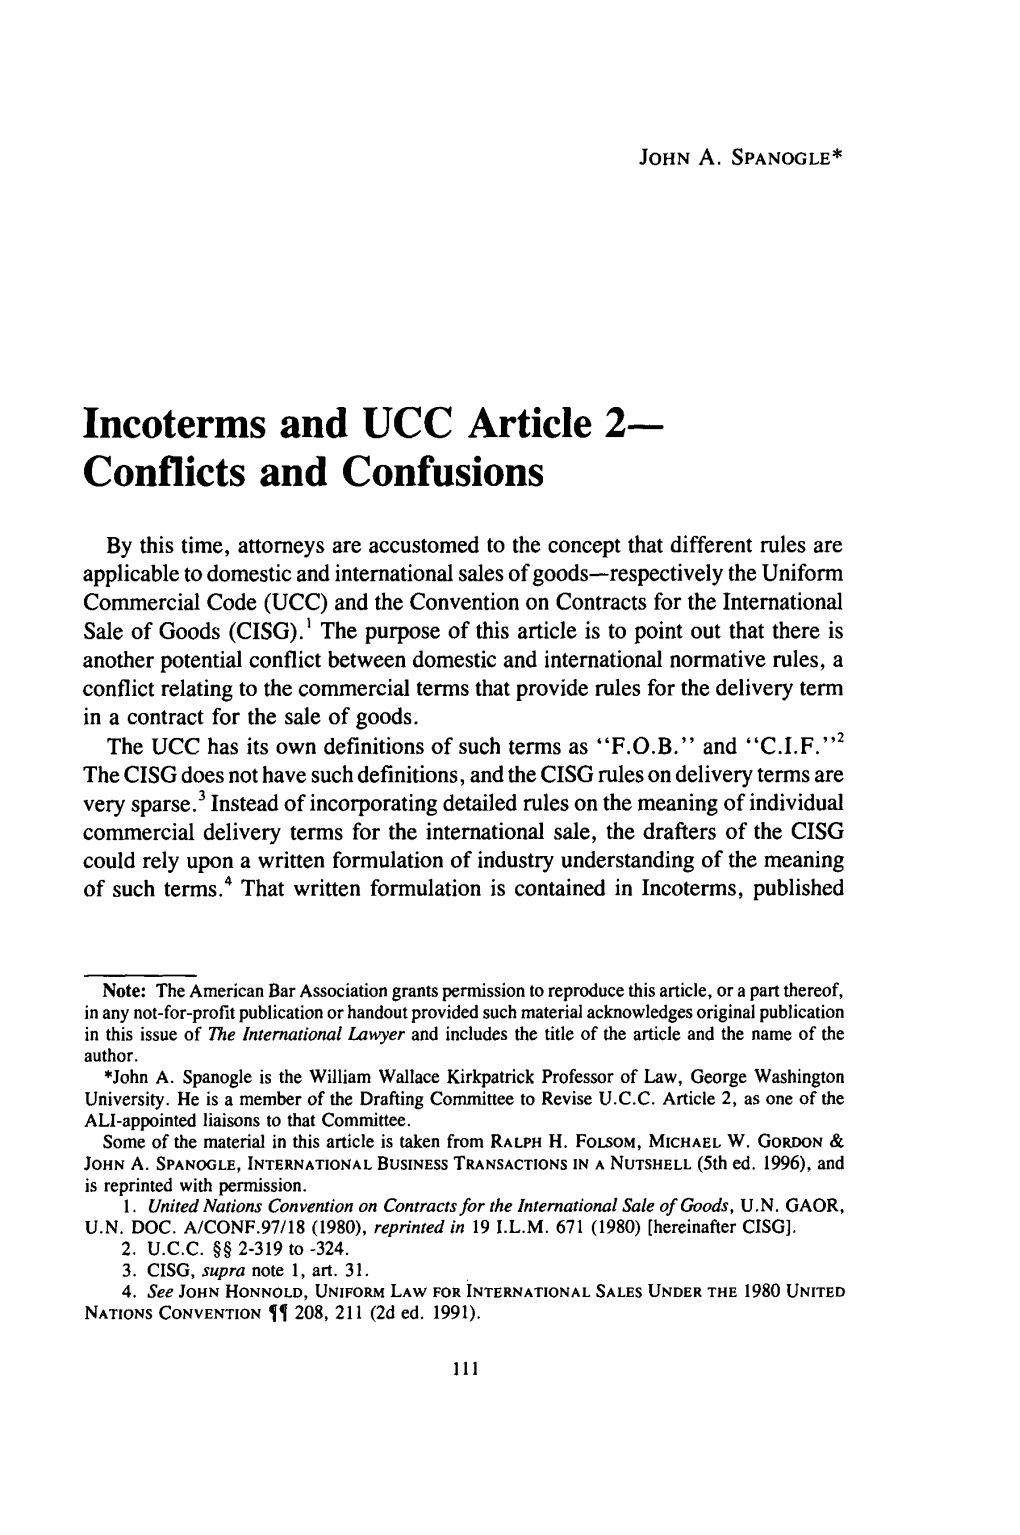 Incoterms and UCC Article 2- Conflicts and Confusions